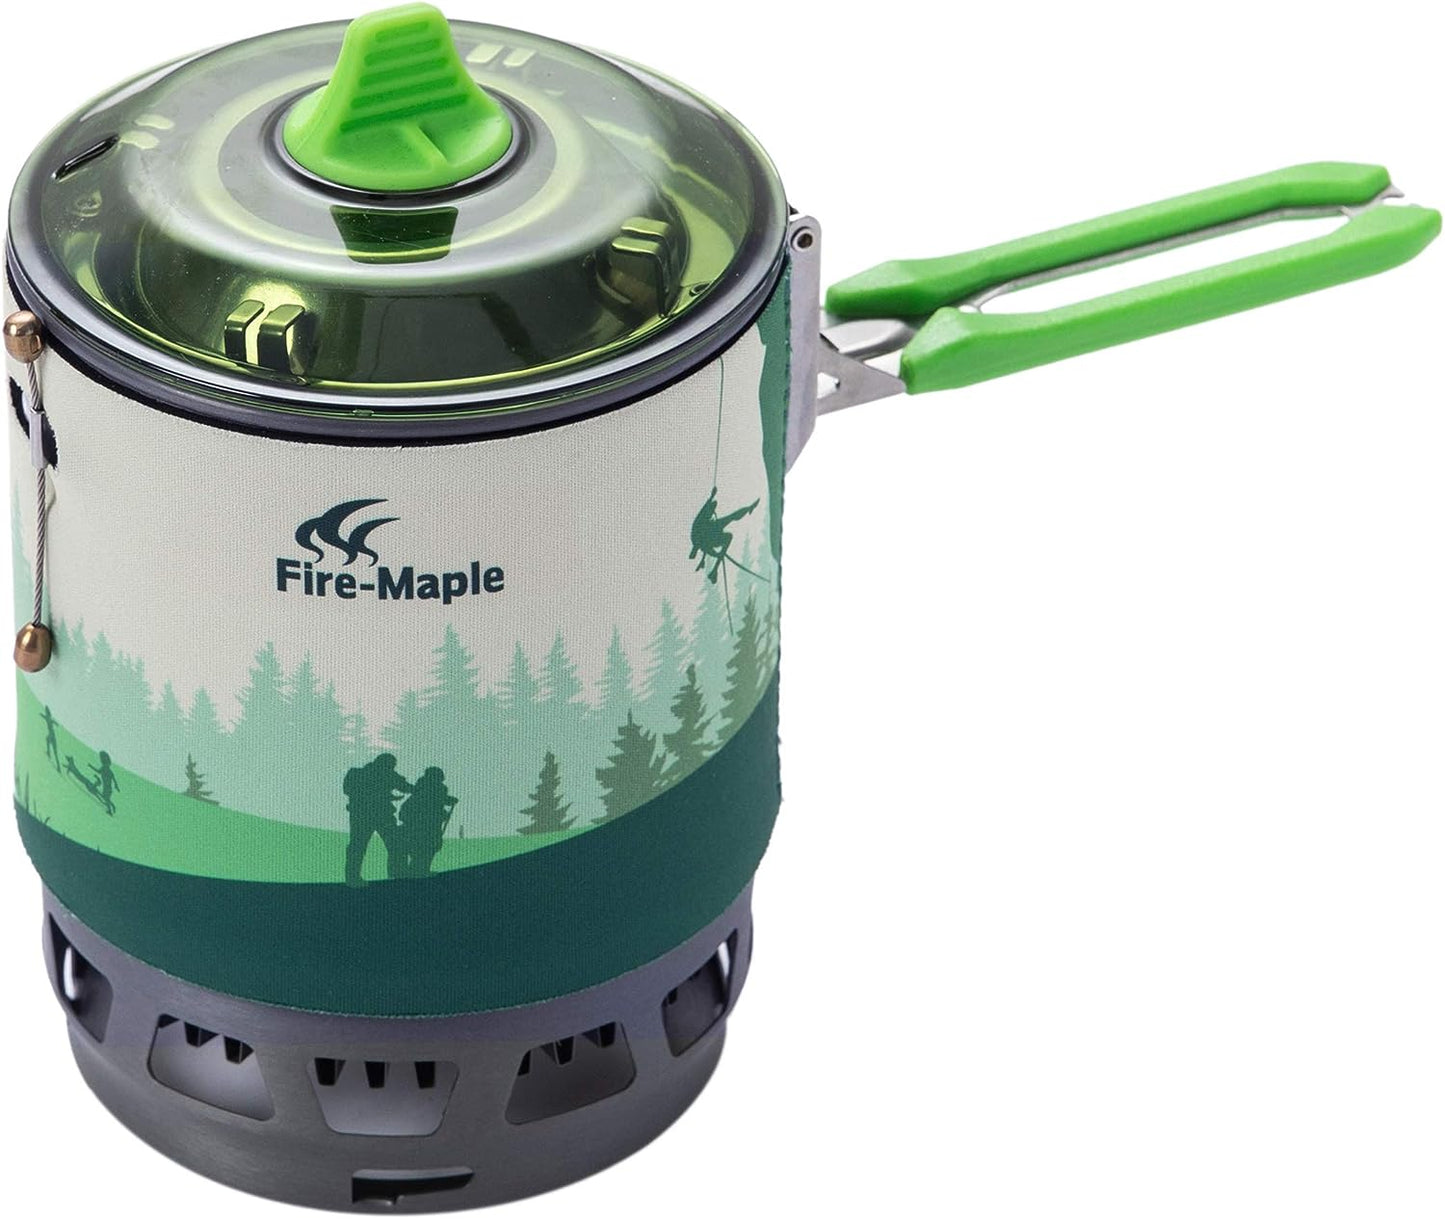 Fire-Maple "Fixed Star 1" Backpacking and Camping Stove System | Outdoor Propane Cooking Gear | Portable Pot/Jet Burner Set | Ideal for Hiking, Trekking, Fishing, Hunting Trips and Emergency Use